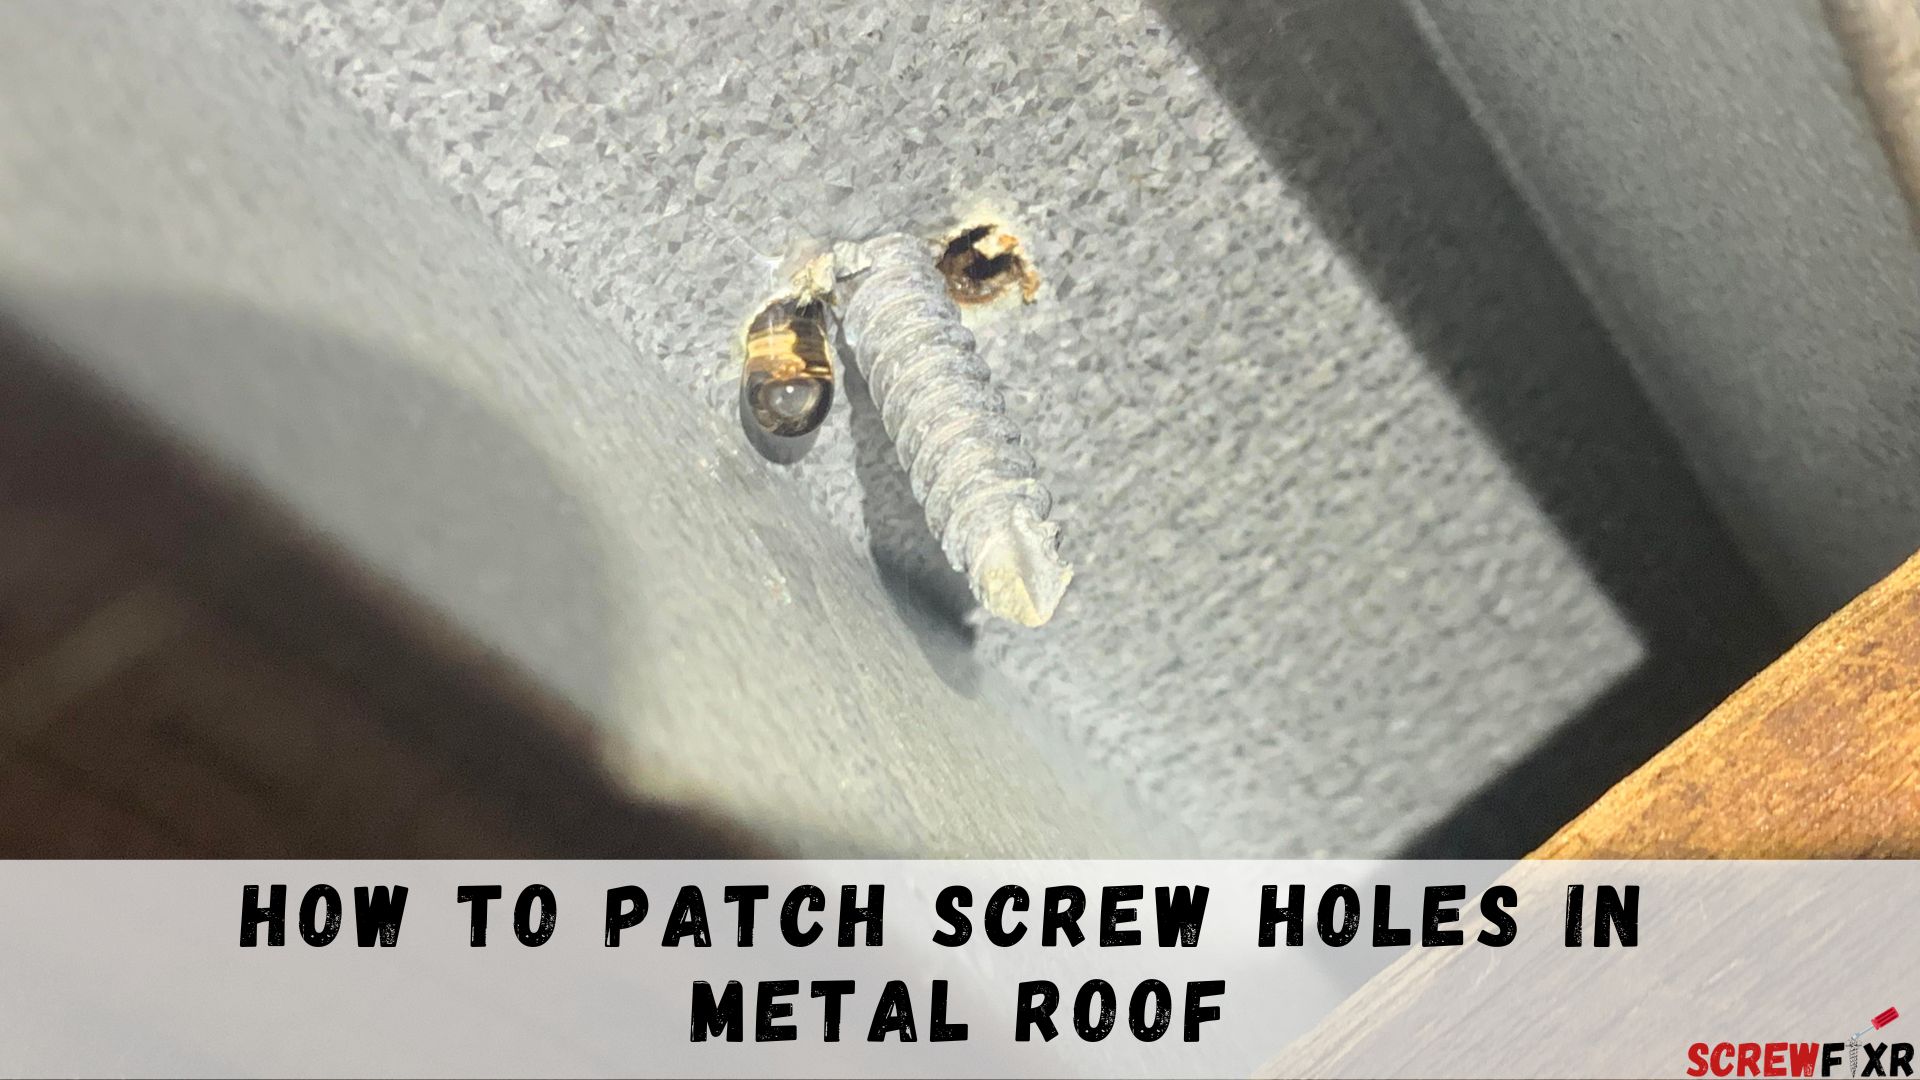 How To Patch Screw Holes In Metal Roof